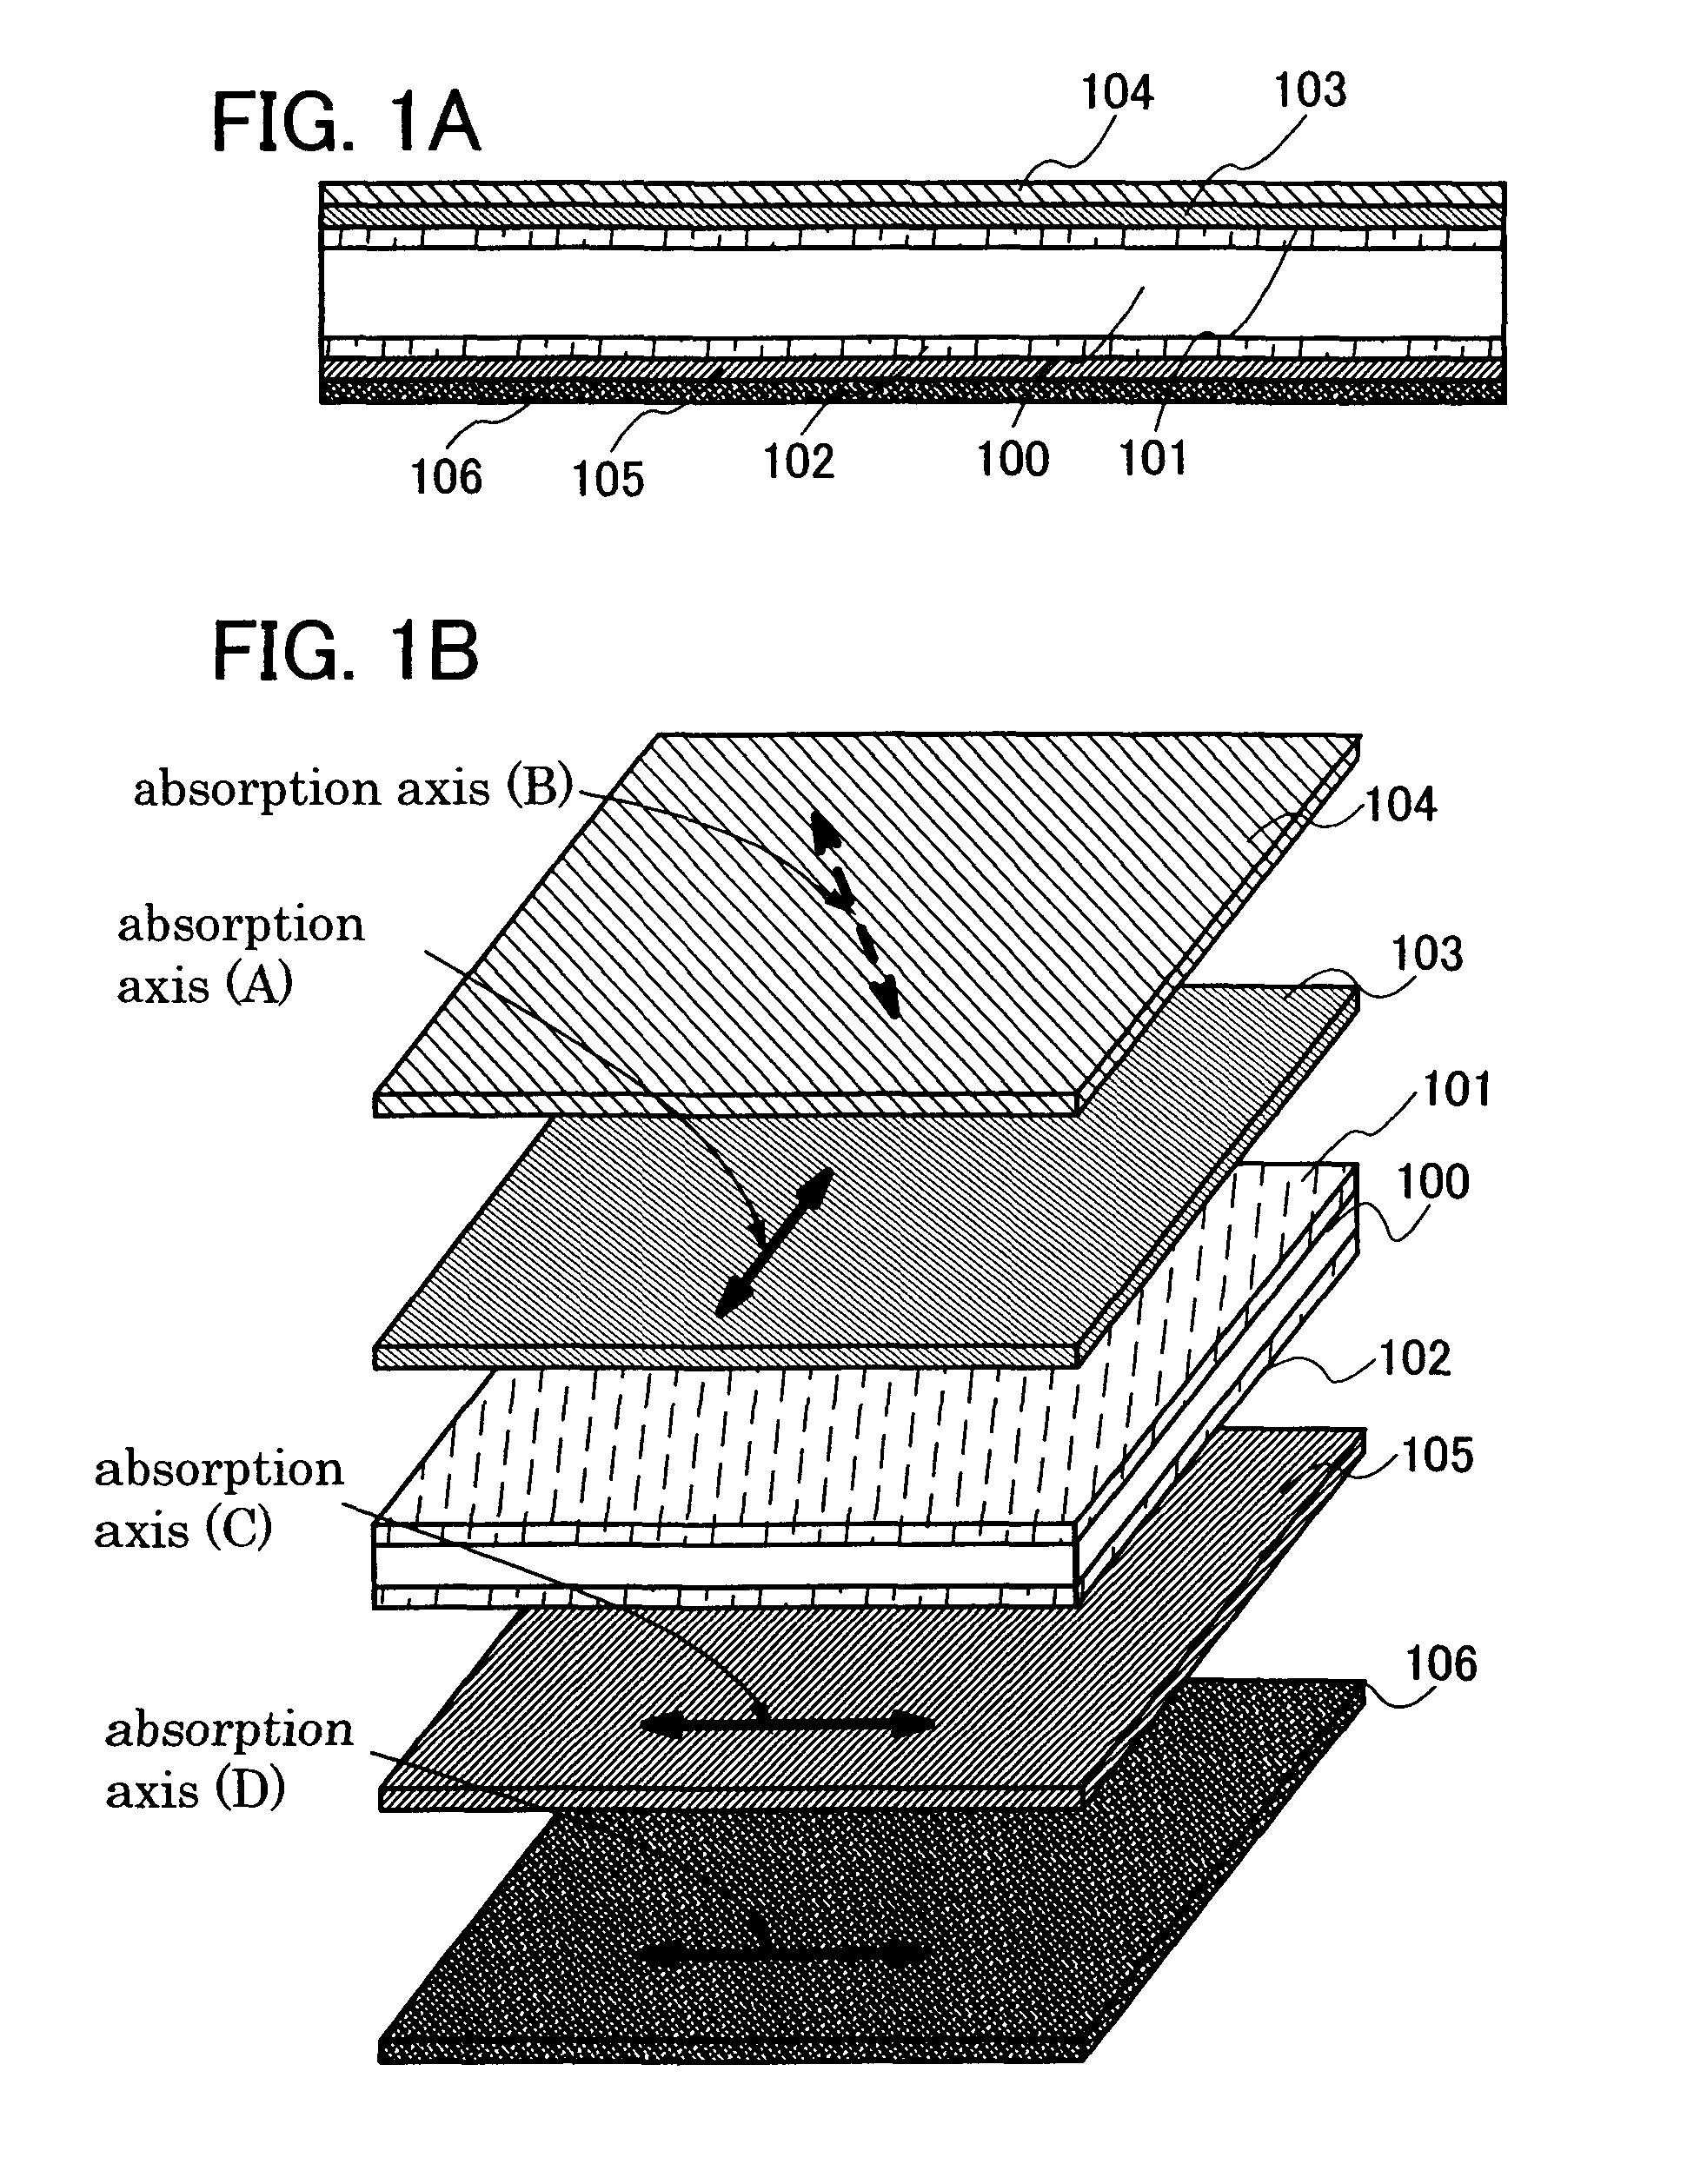 Display device having stacked polarizers that differ in degrees of light absorbing bands and that are between a pair of protective layers such that no protective layer is located between the stacked polarizers